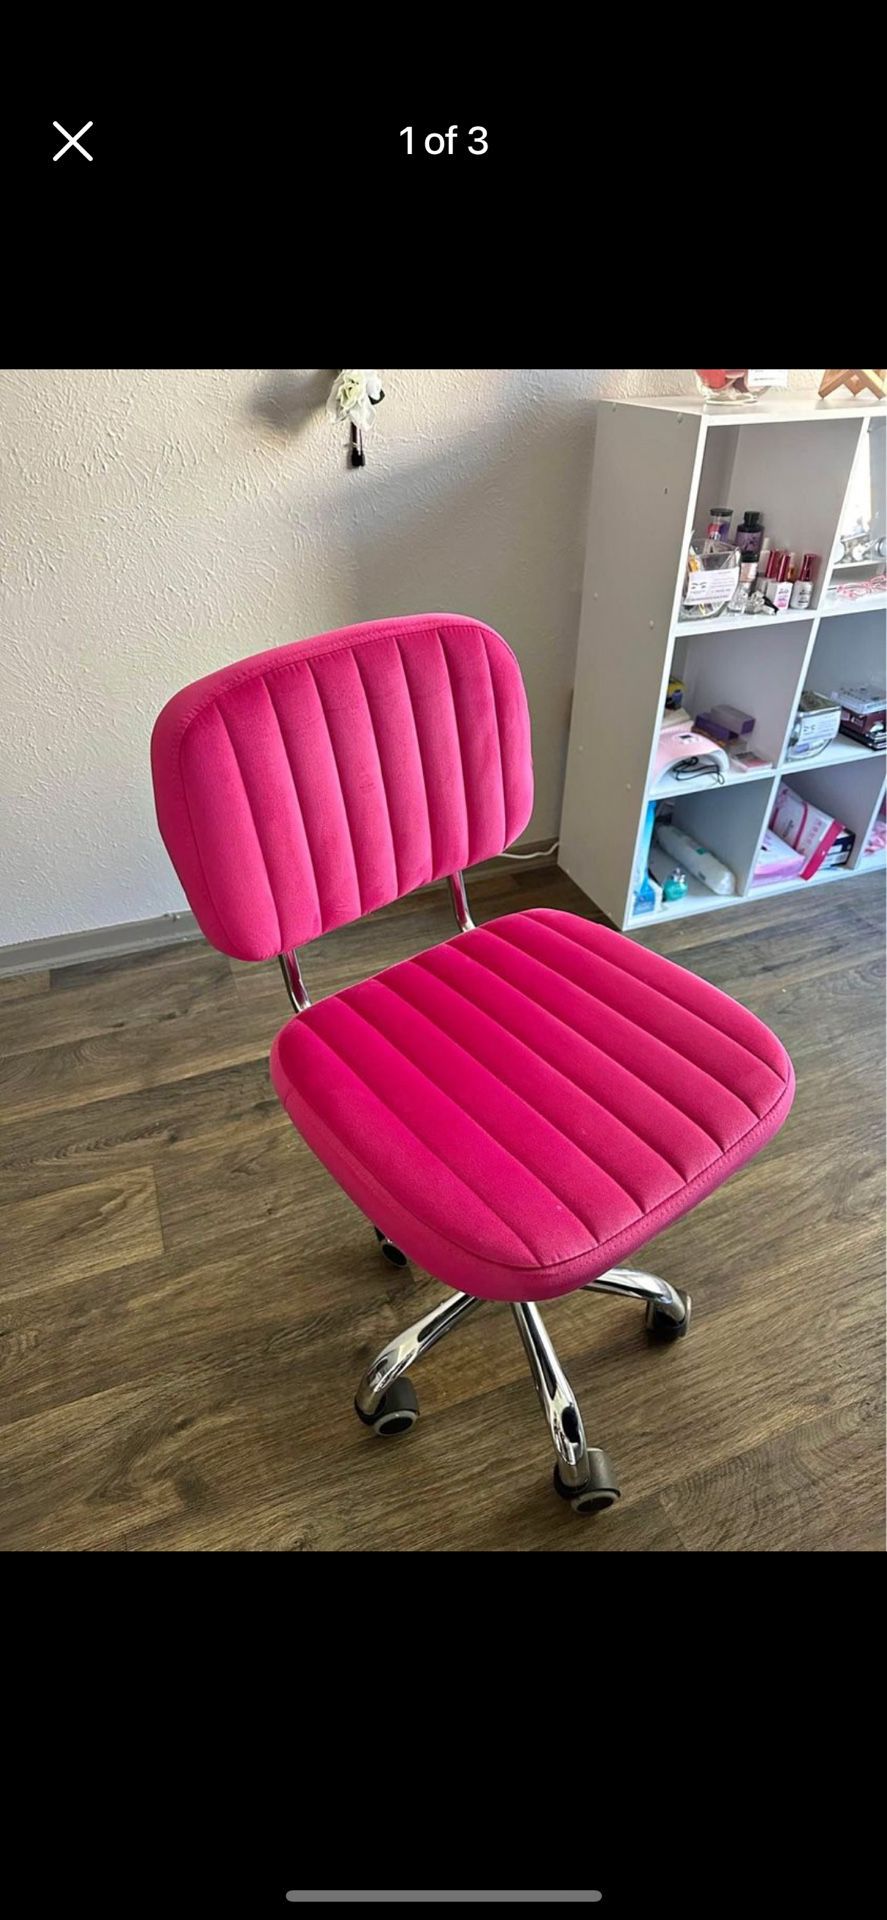 Small Bright Pink Vanity Chair 